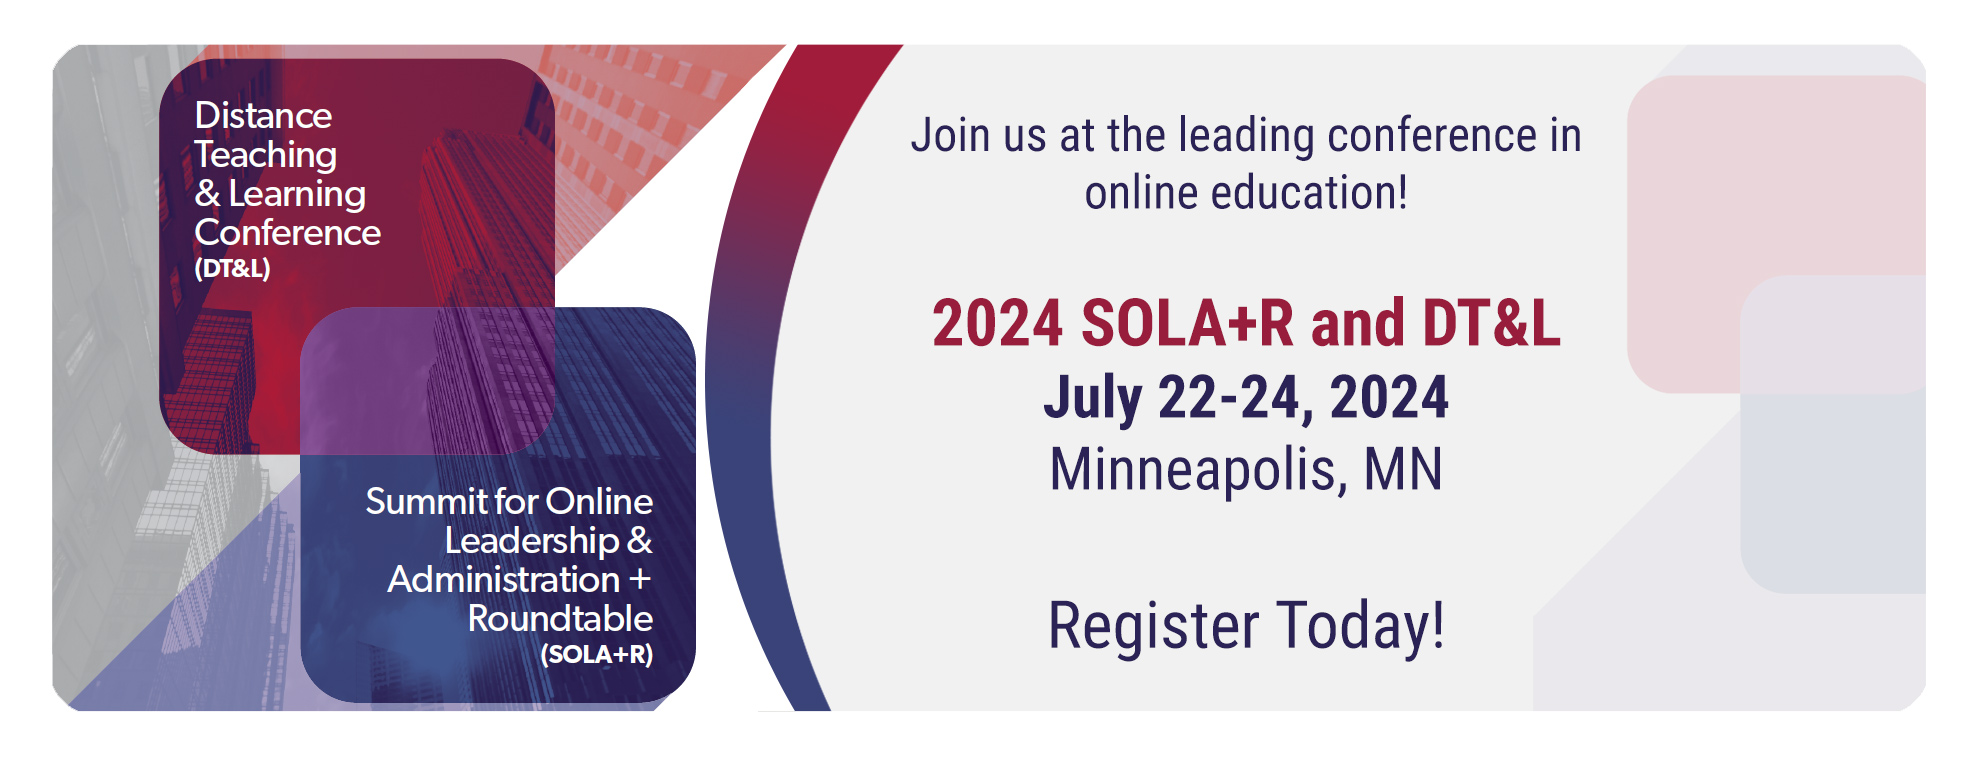 2024 SOLA+R and DT&L | July 22-24, 2024 | Minneapolis, MN | Register Today! Join us at the leading conference in online education.